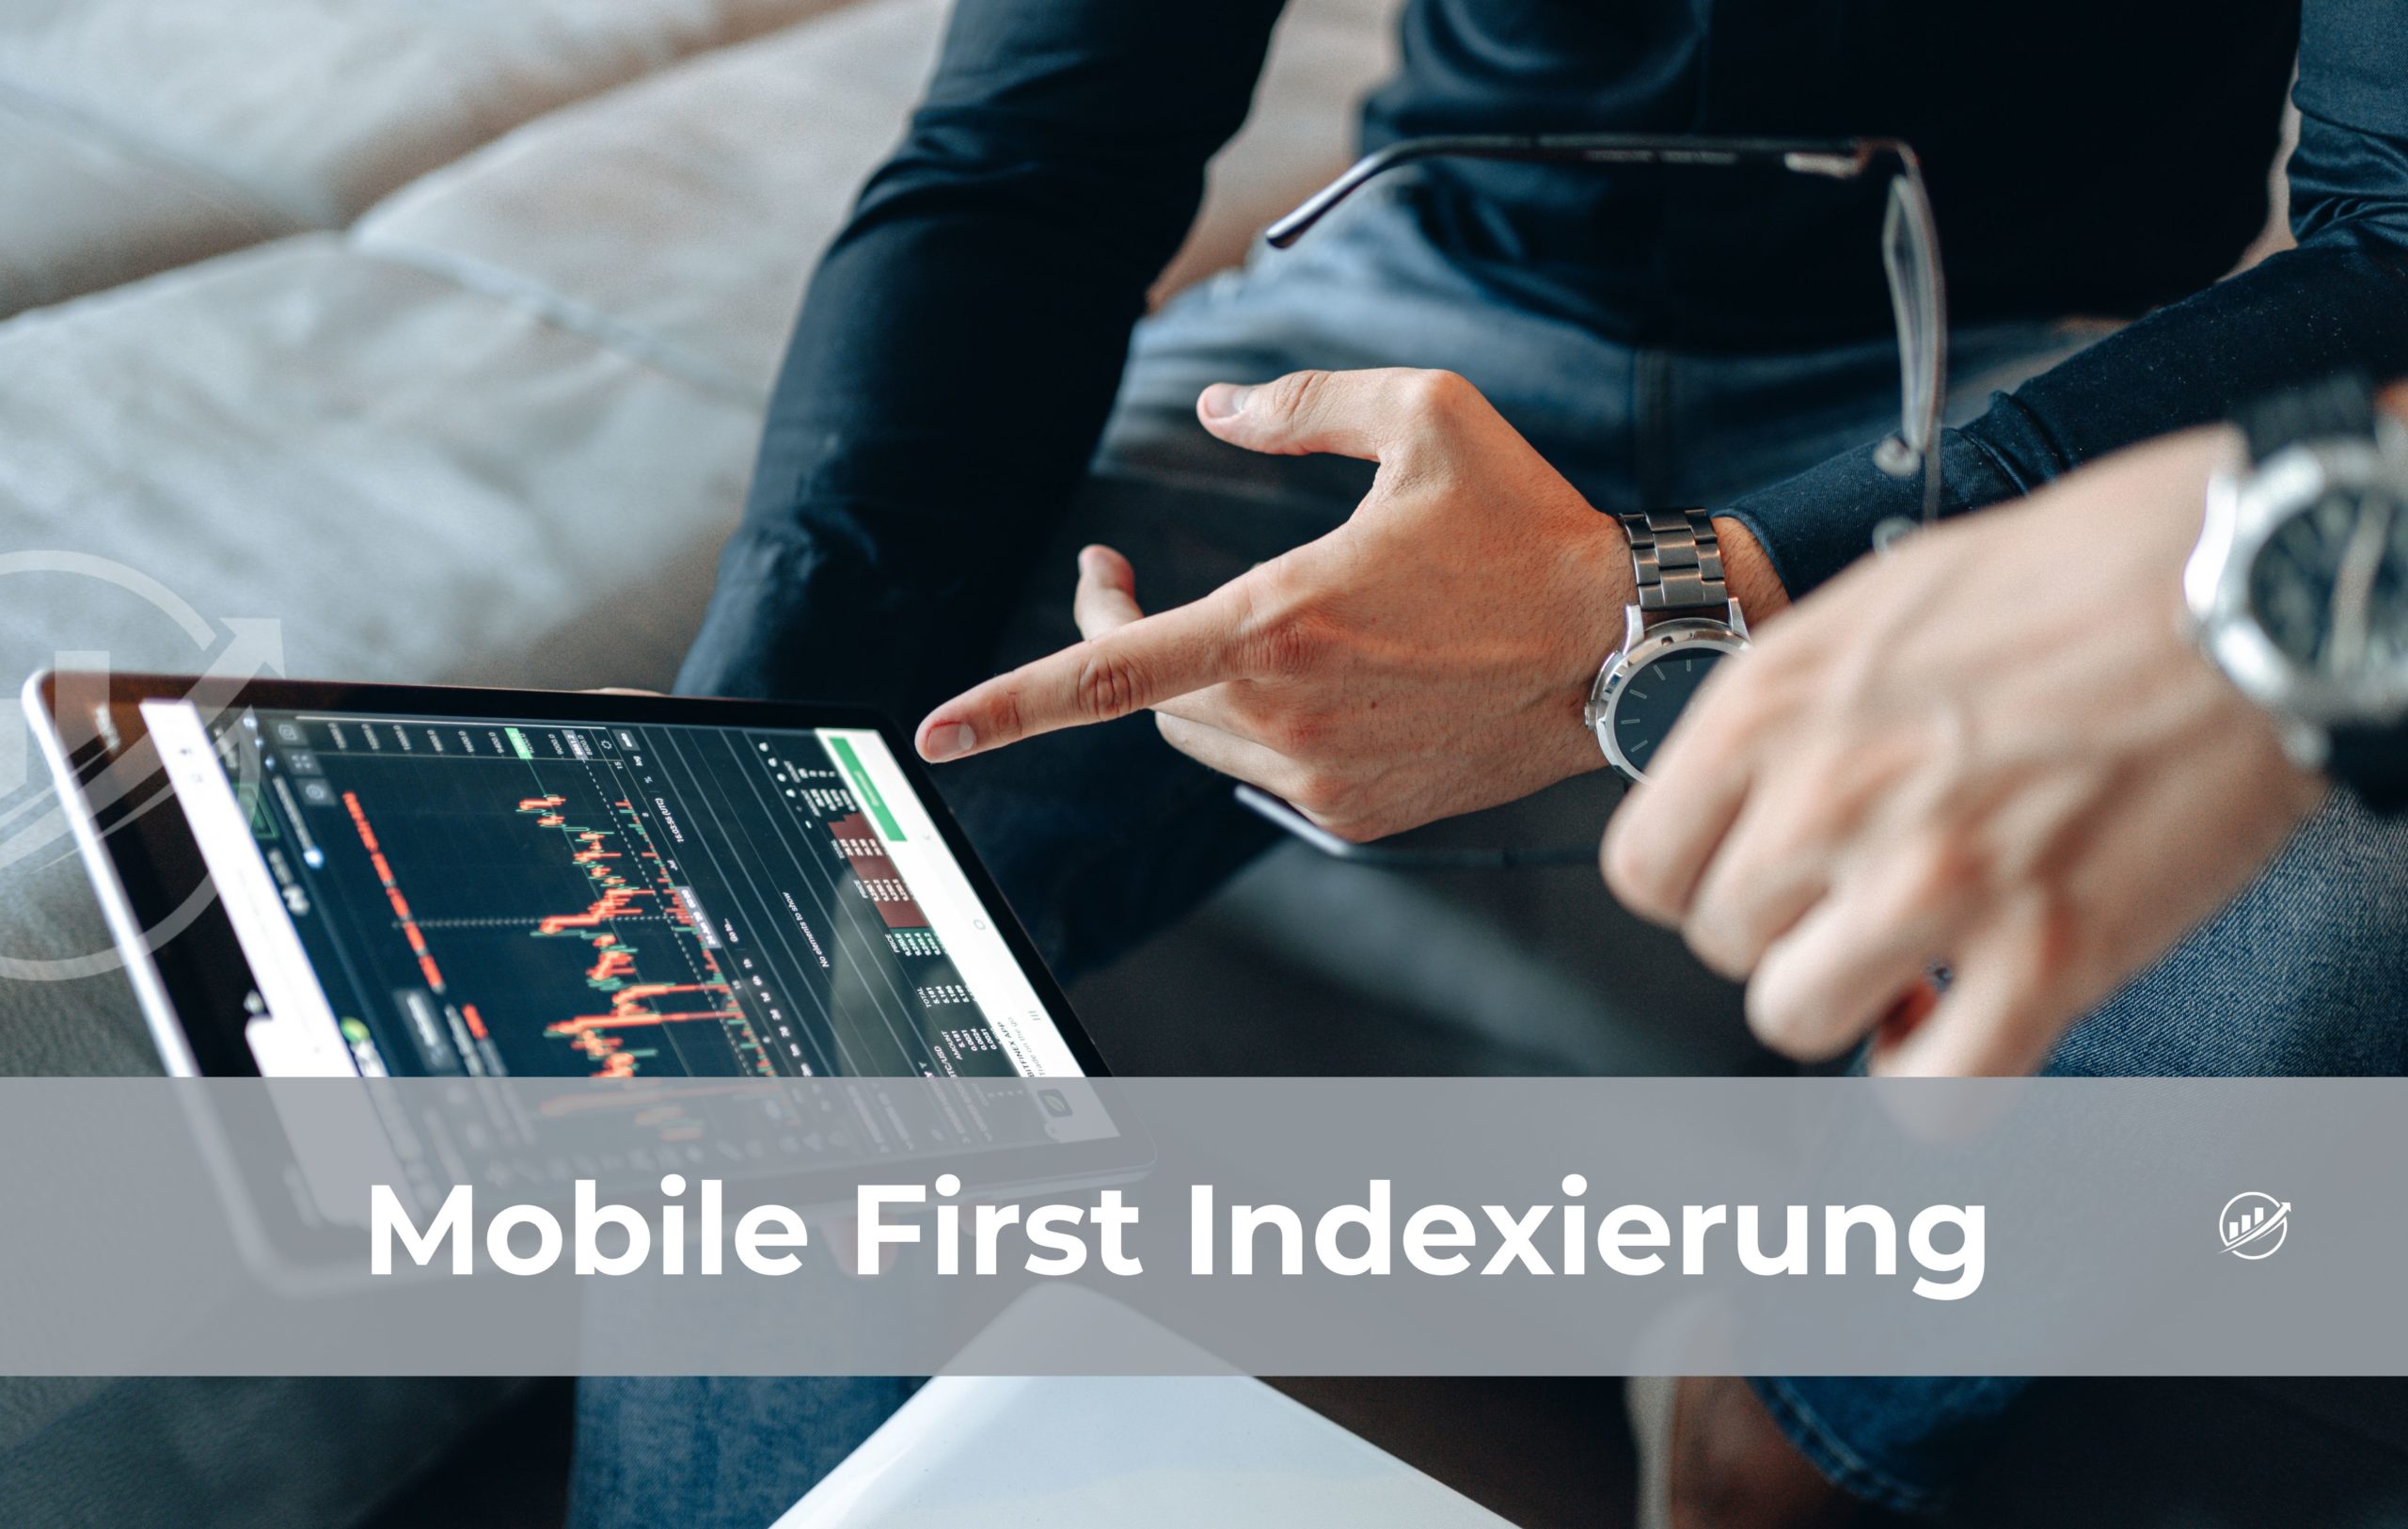 Mobile First Indexierung